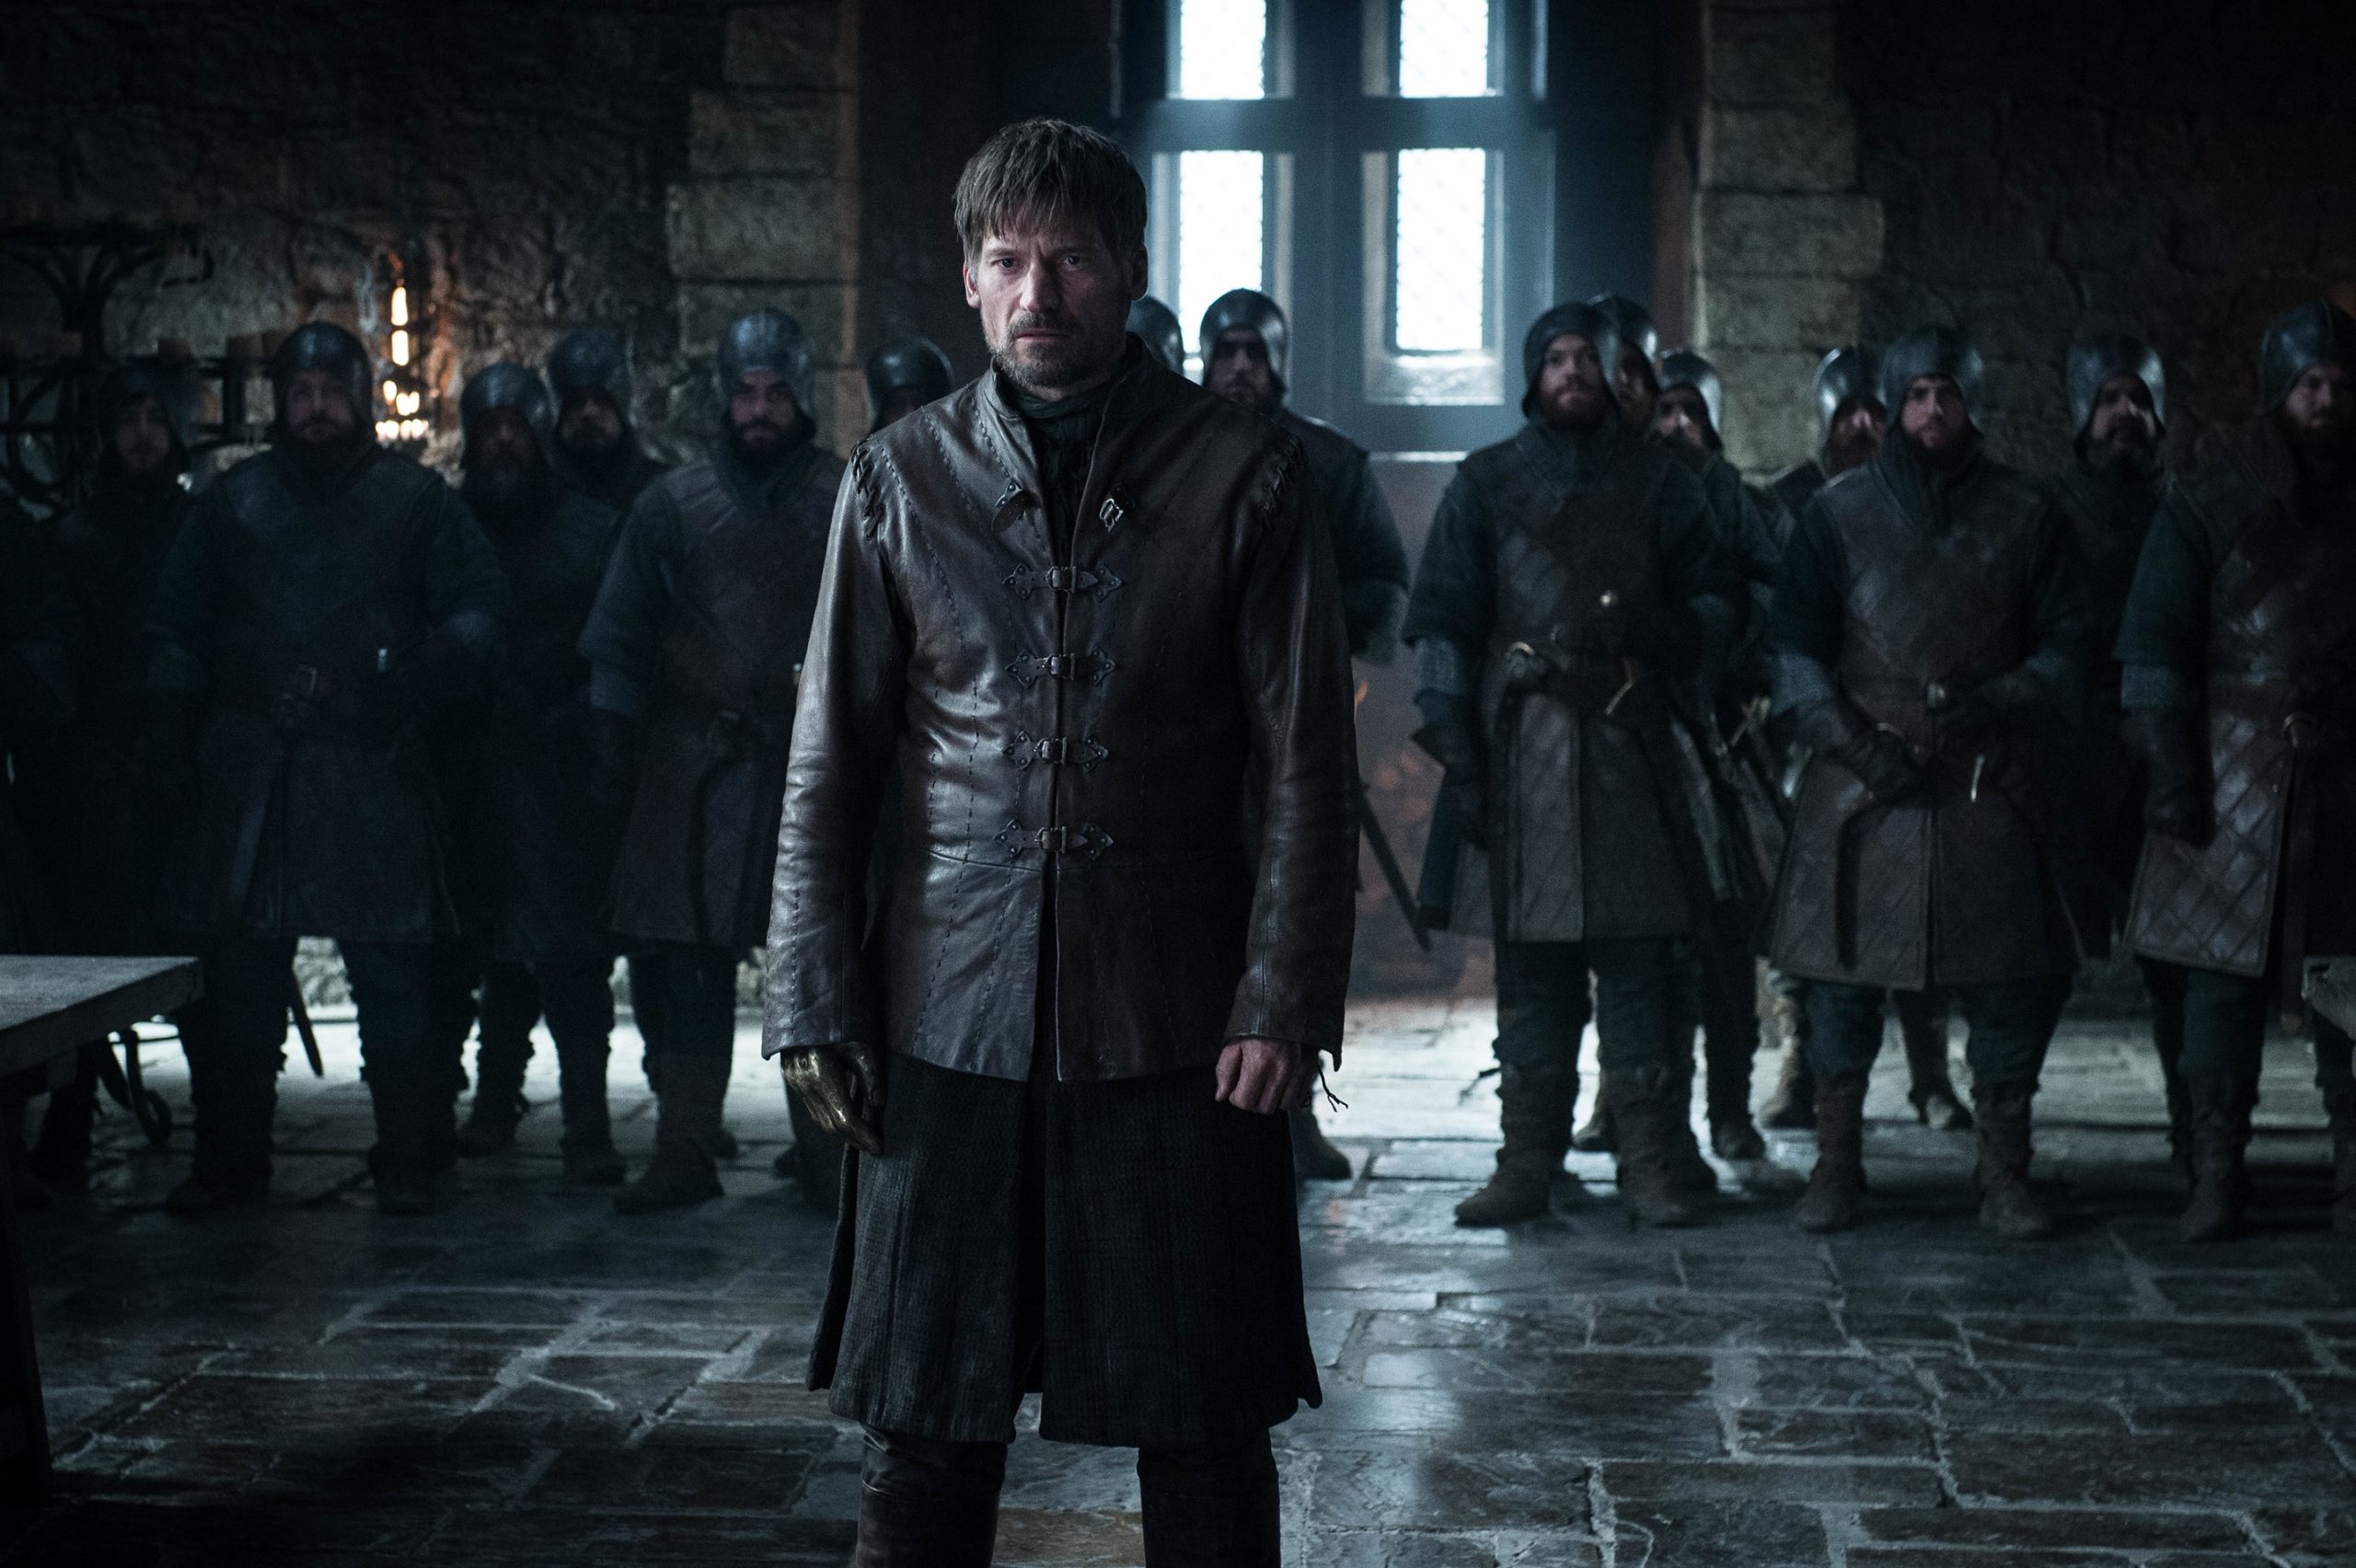 'game of thrones'- "episode 8-2" (source: hbo)